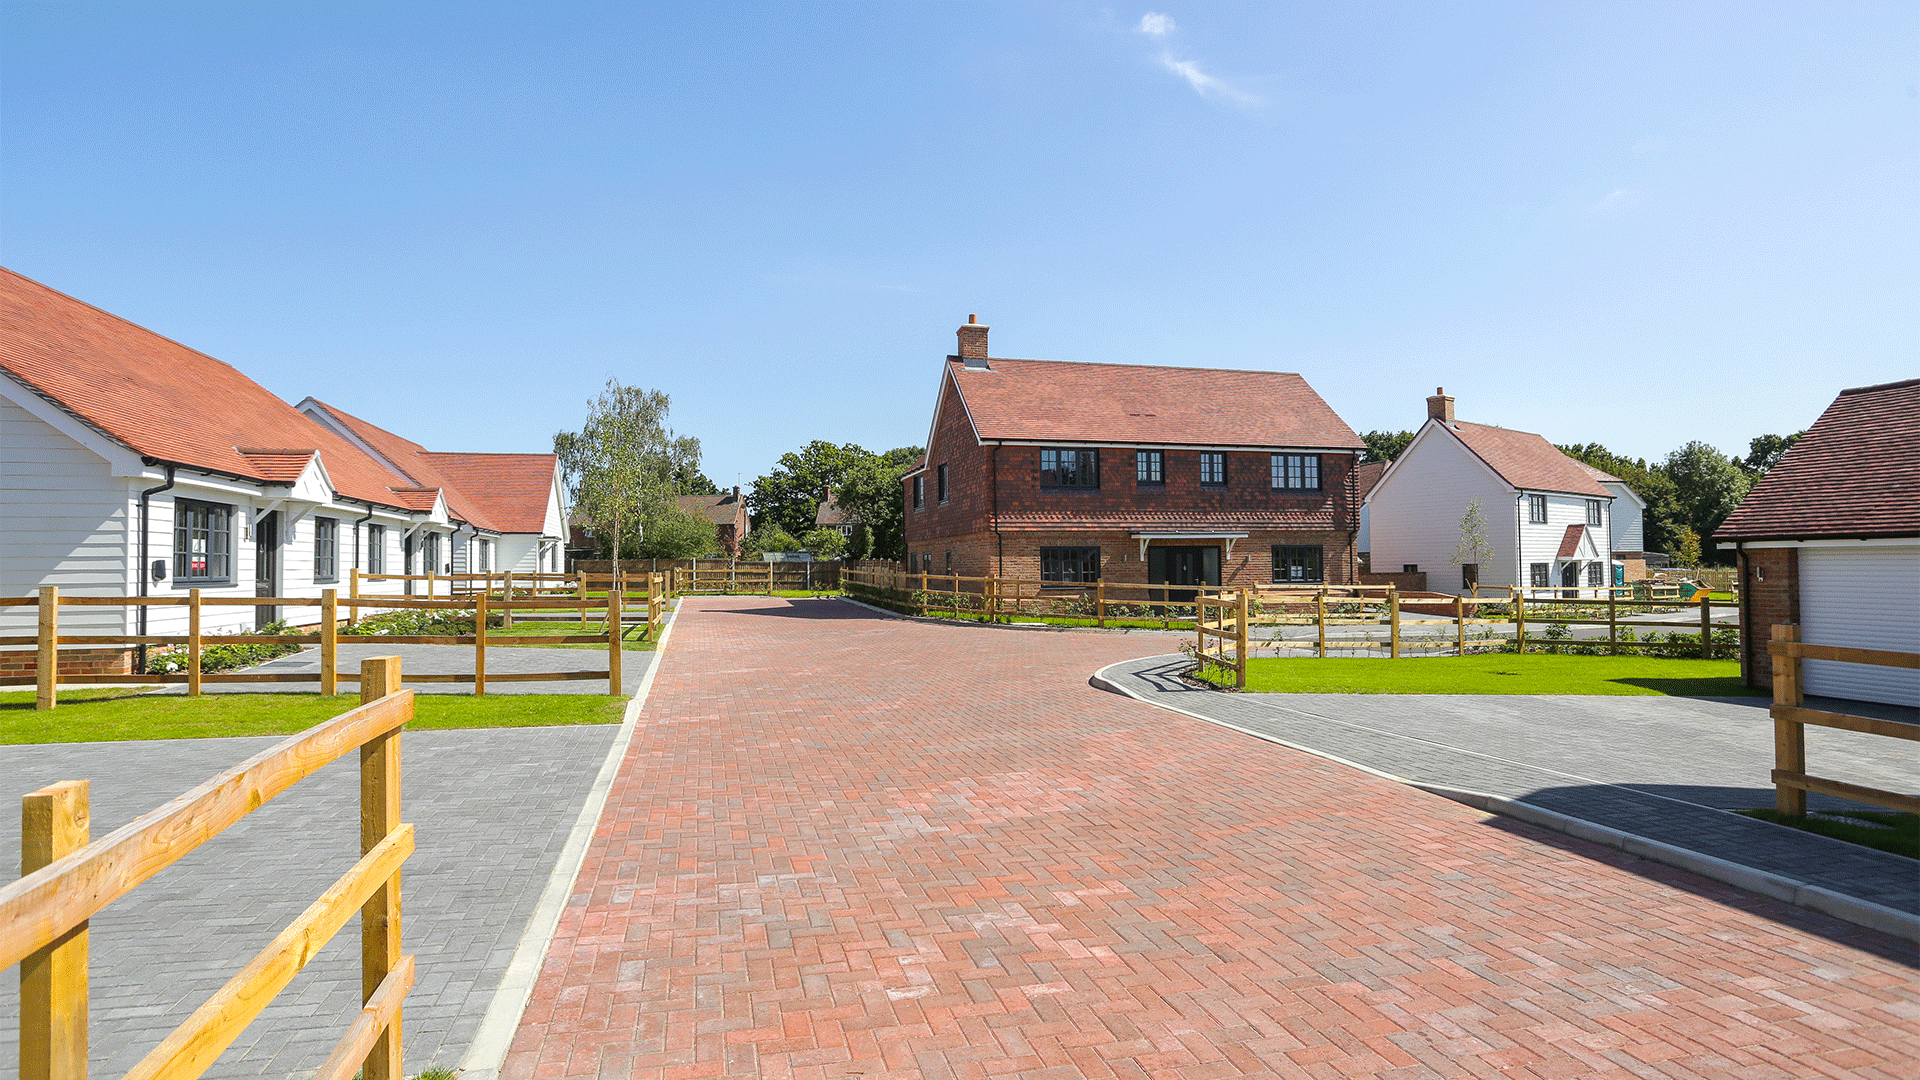 Miller's Meadow Street View close with white bungalows along the left and a large detached house on the right